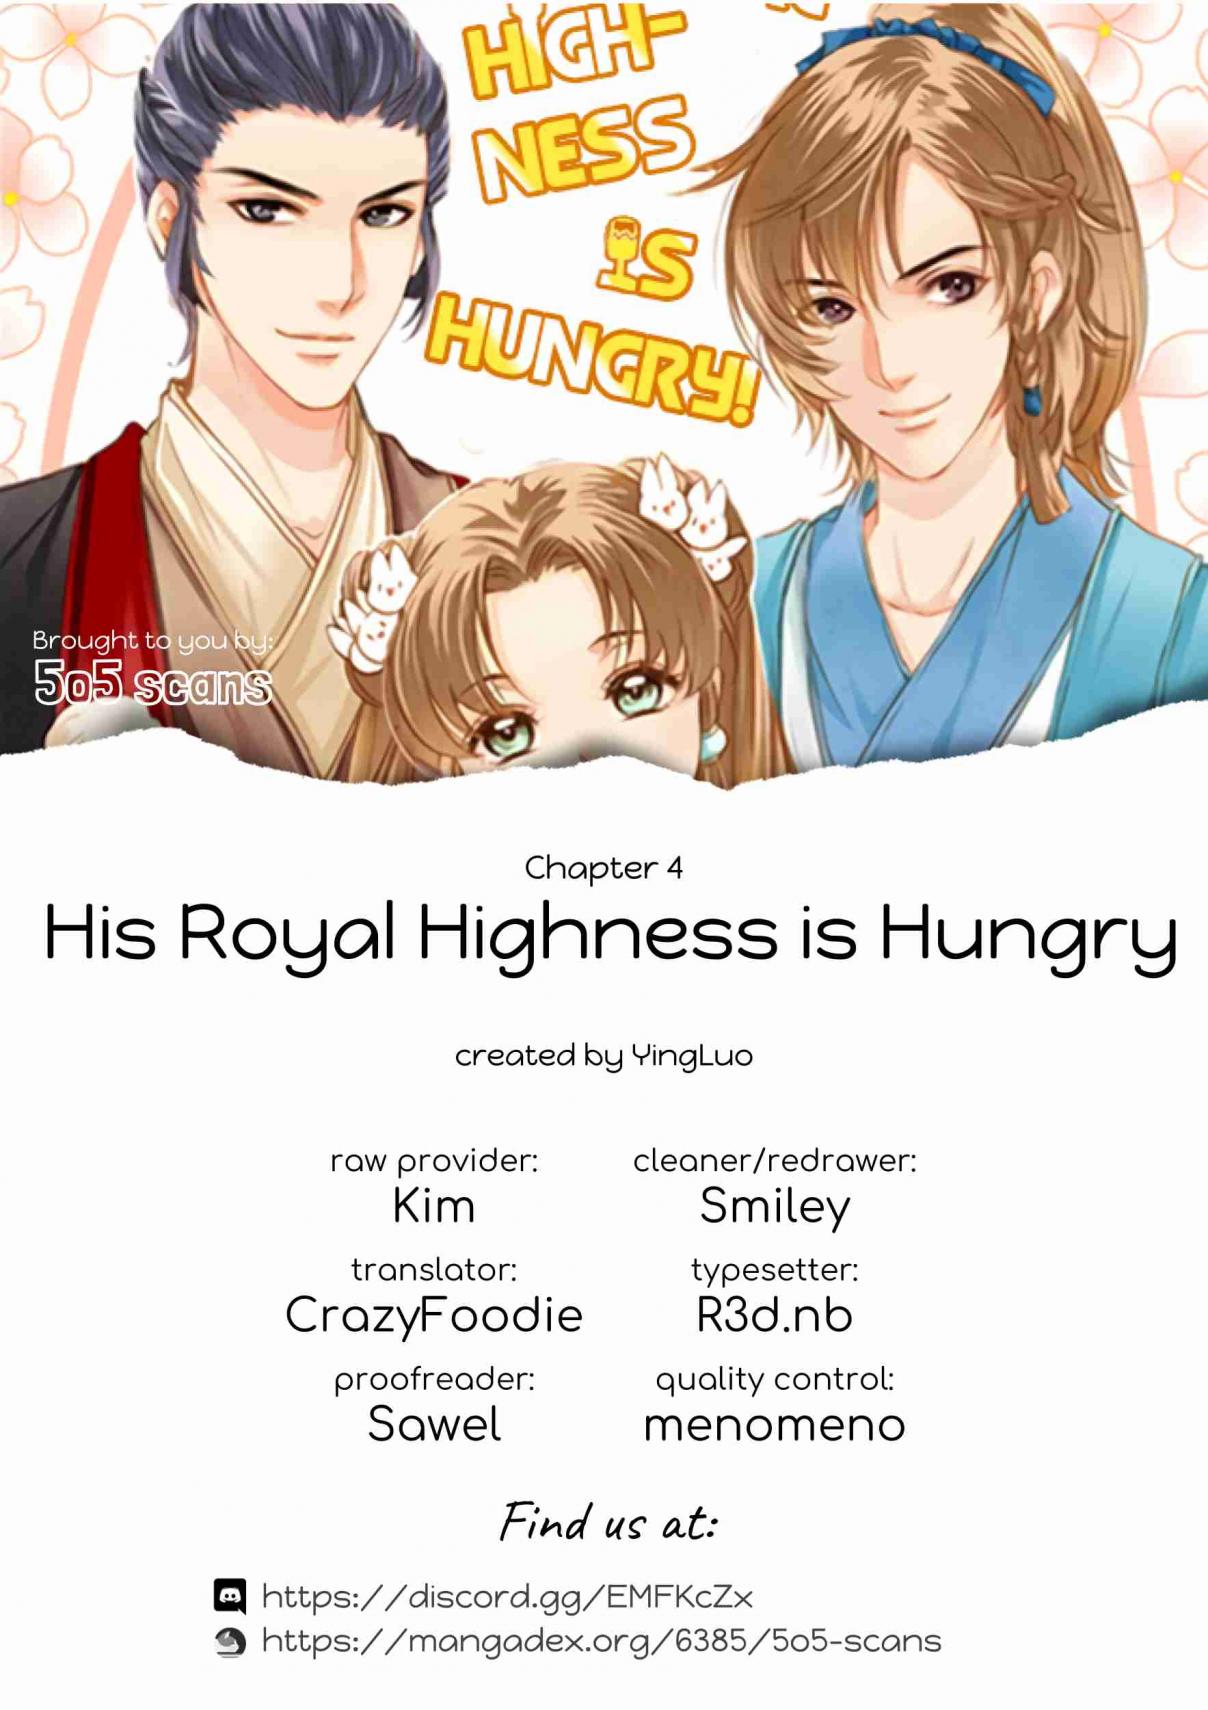 His Royal Highness is Hungry Ch. 4 Yeast to the rescue